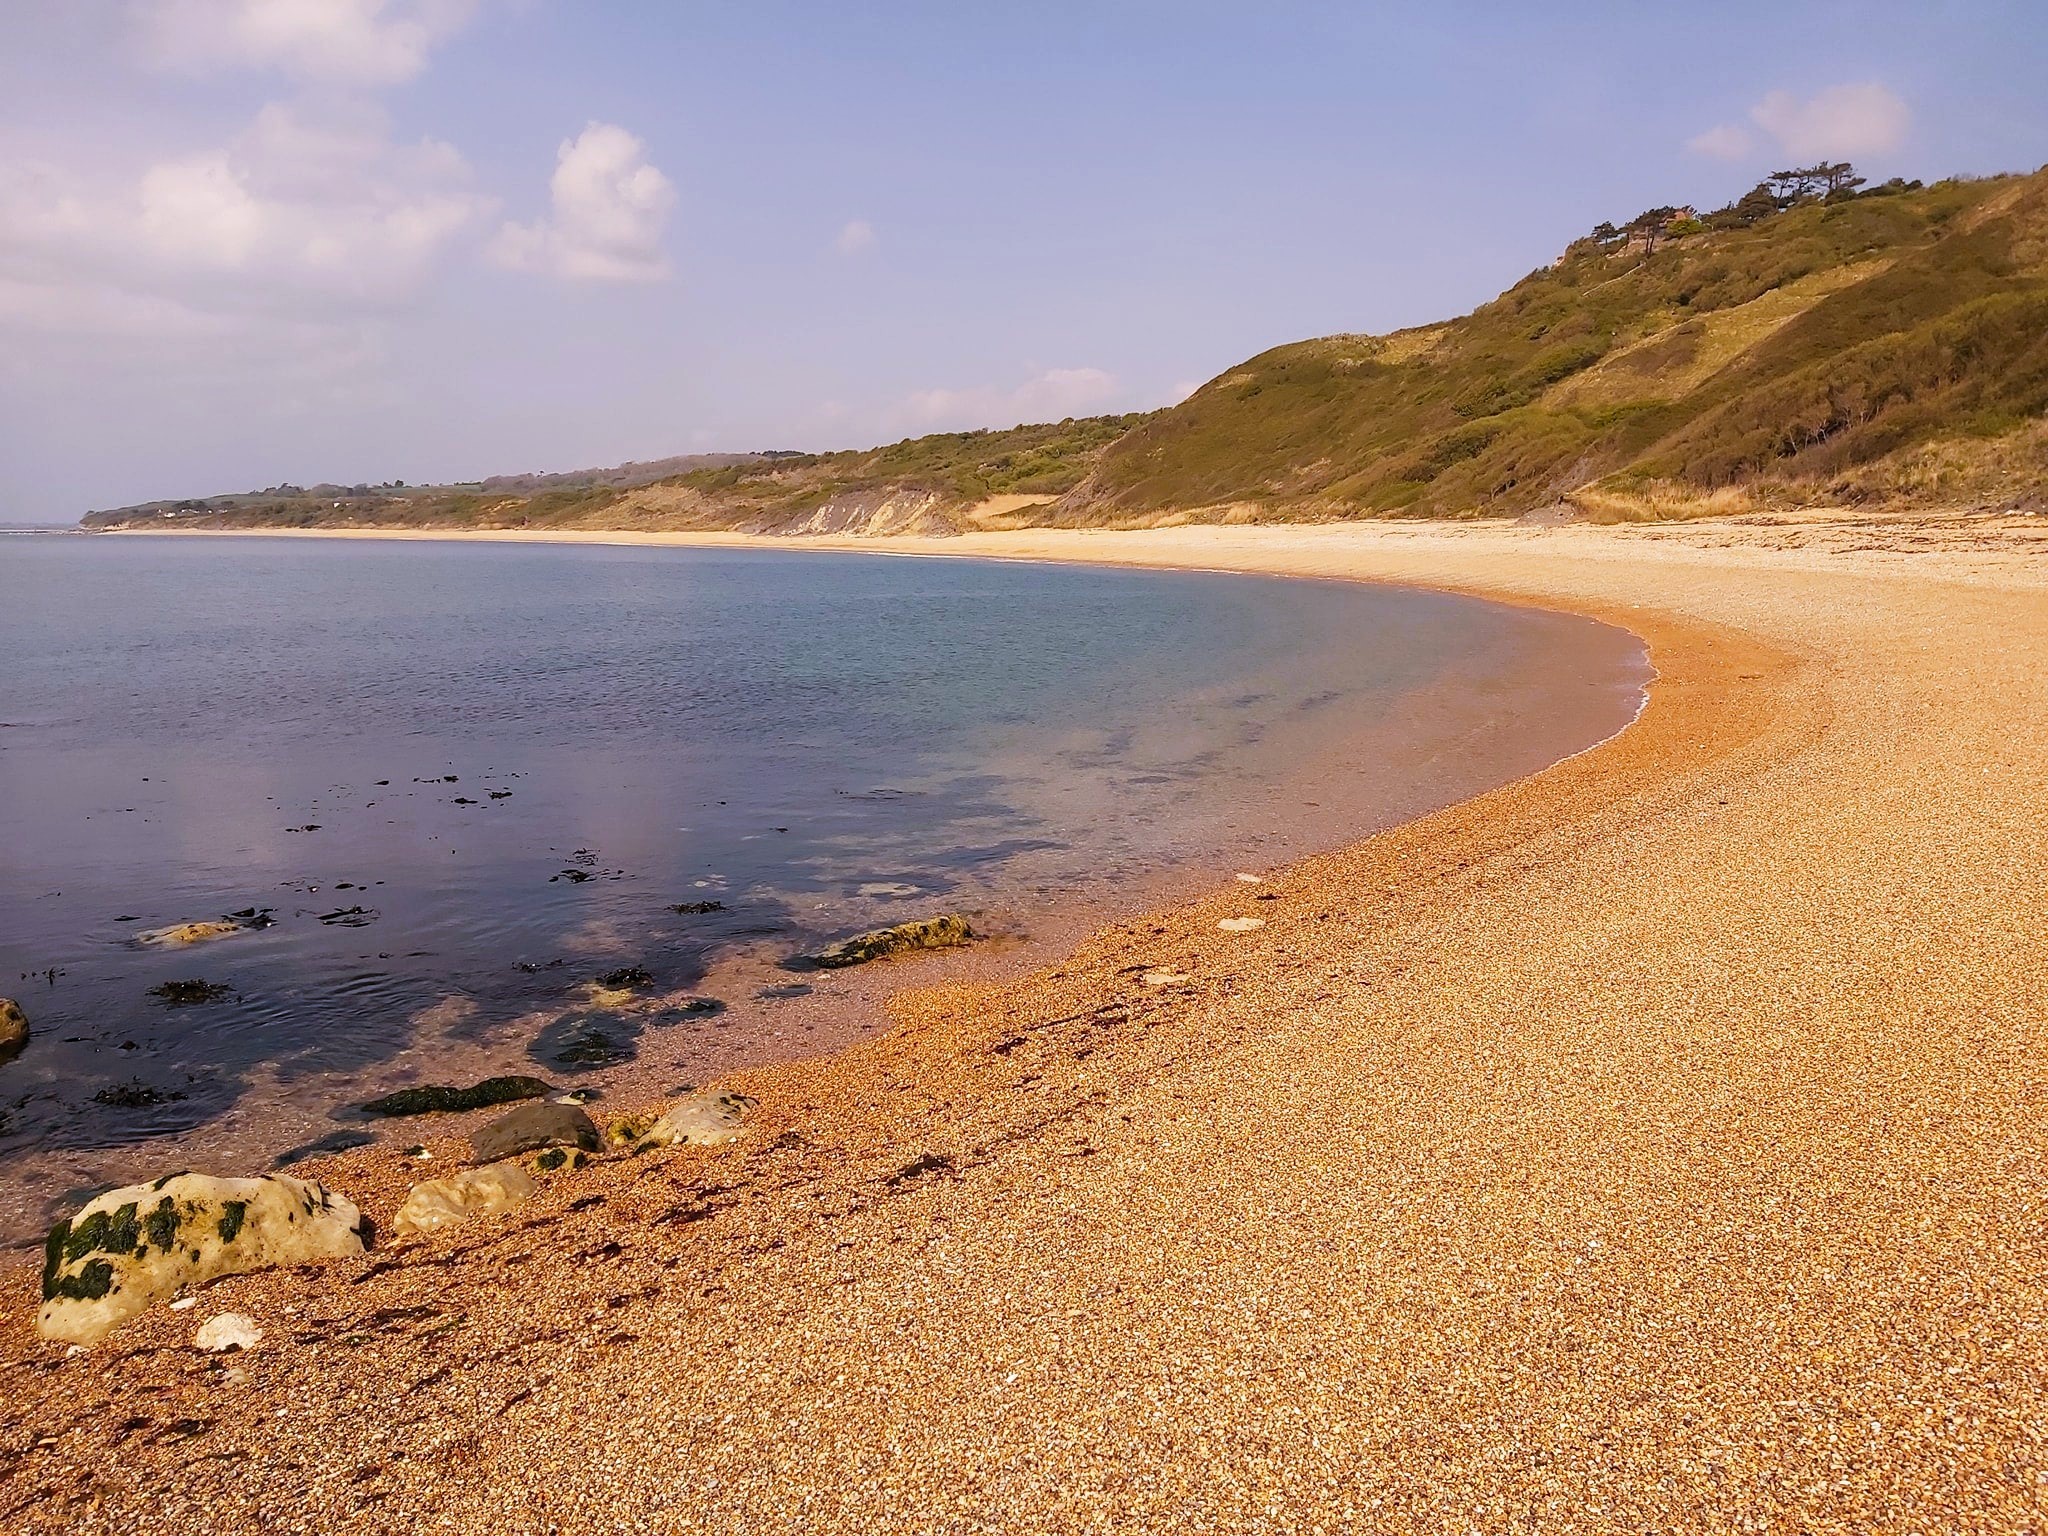 Rolling hills and the shingle at Ringstead beach, Dorset, England